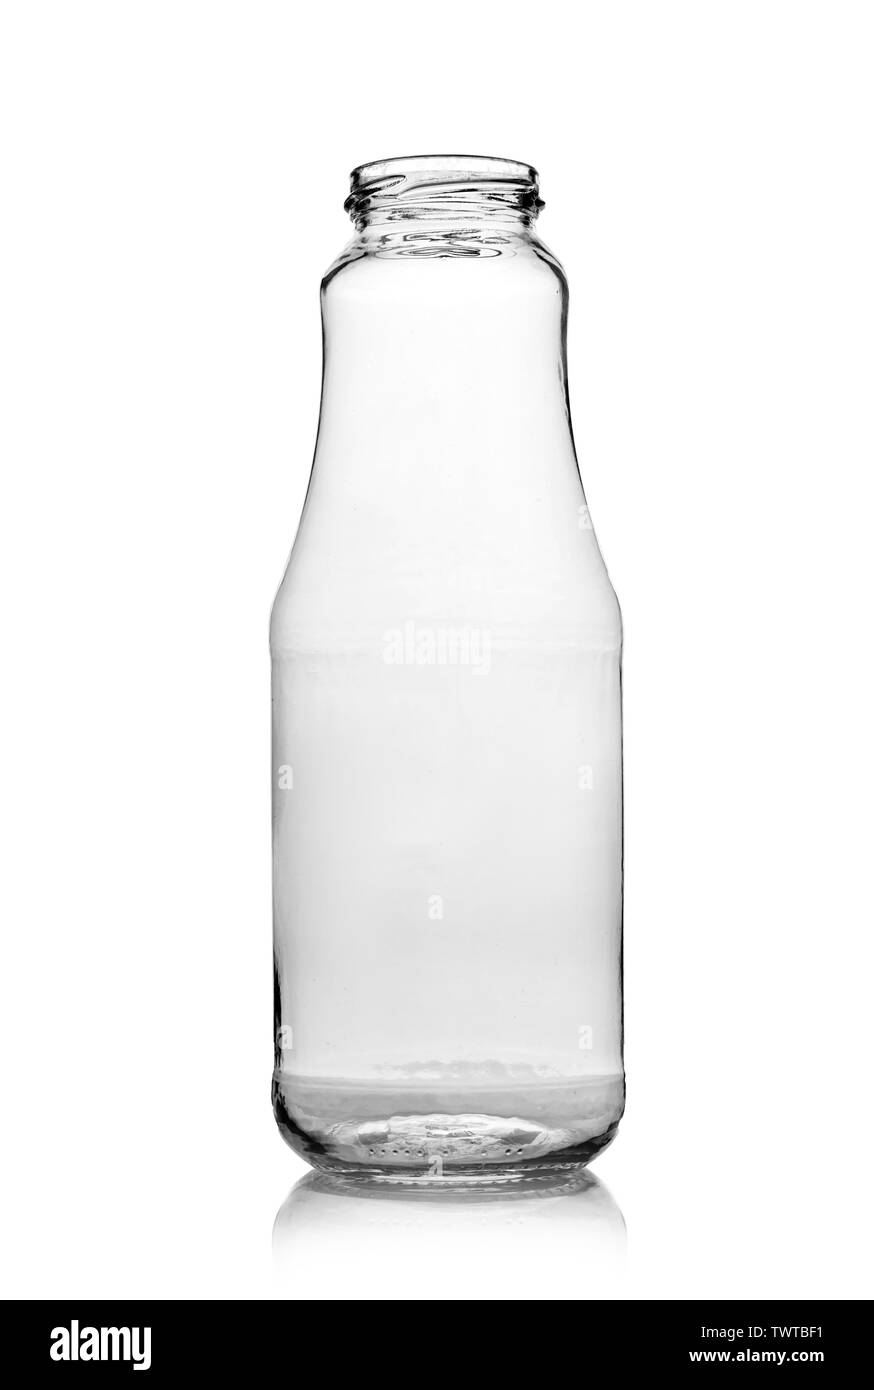 Empty glass bottle for drinks milk, juice, water on a white background. Stock Photo